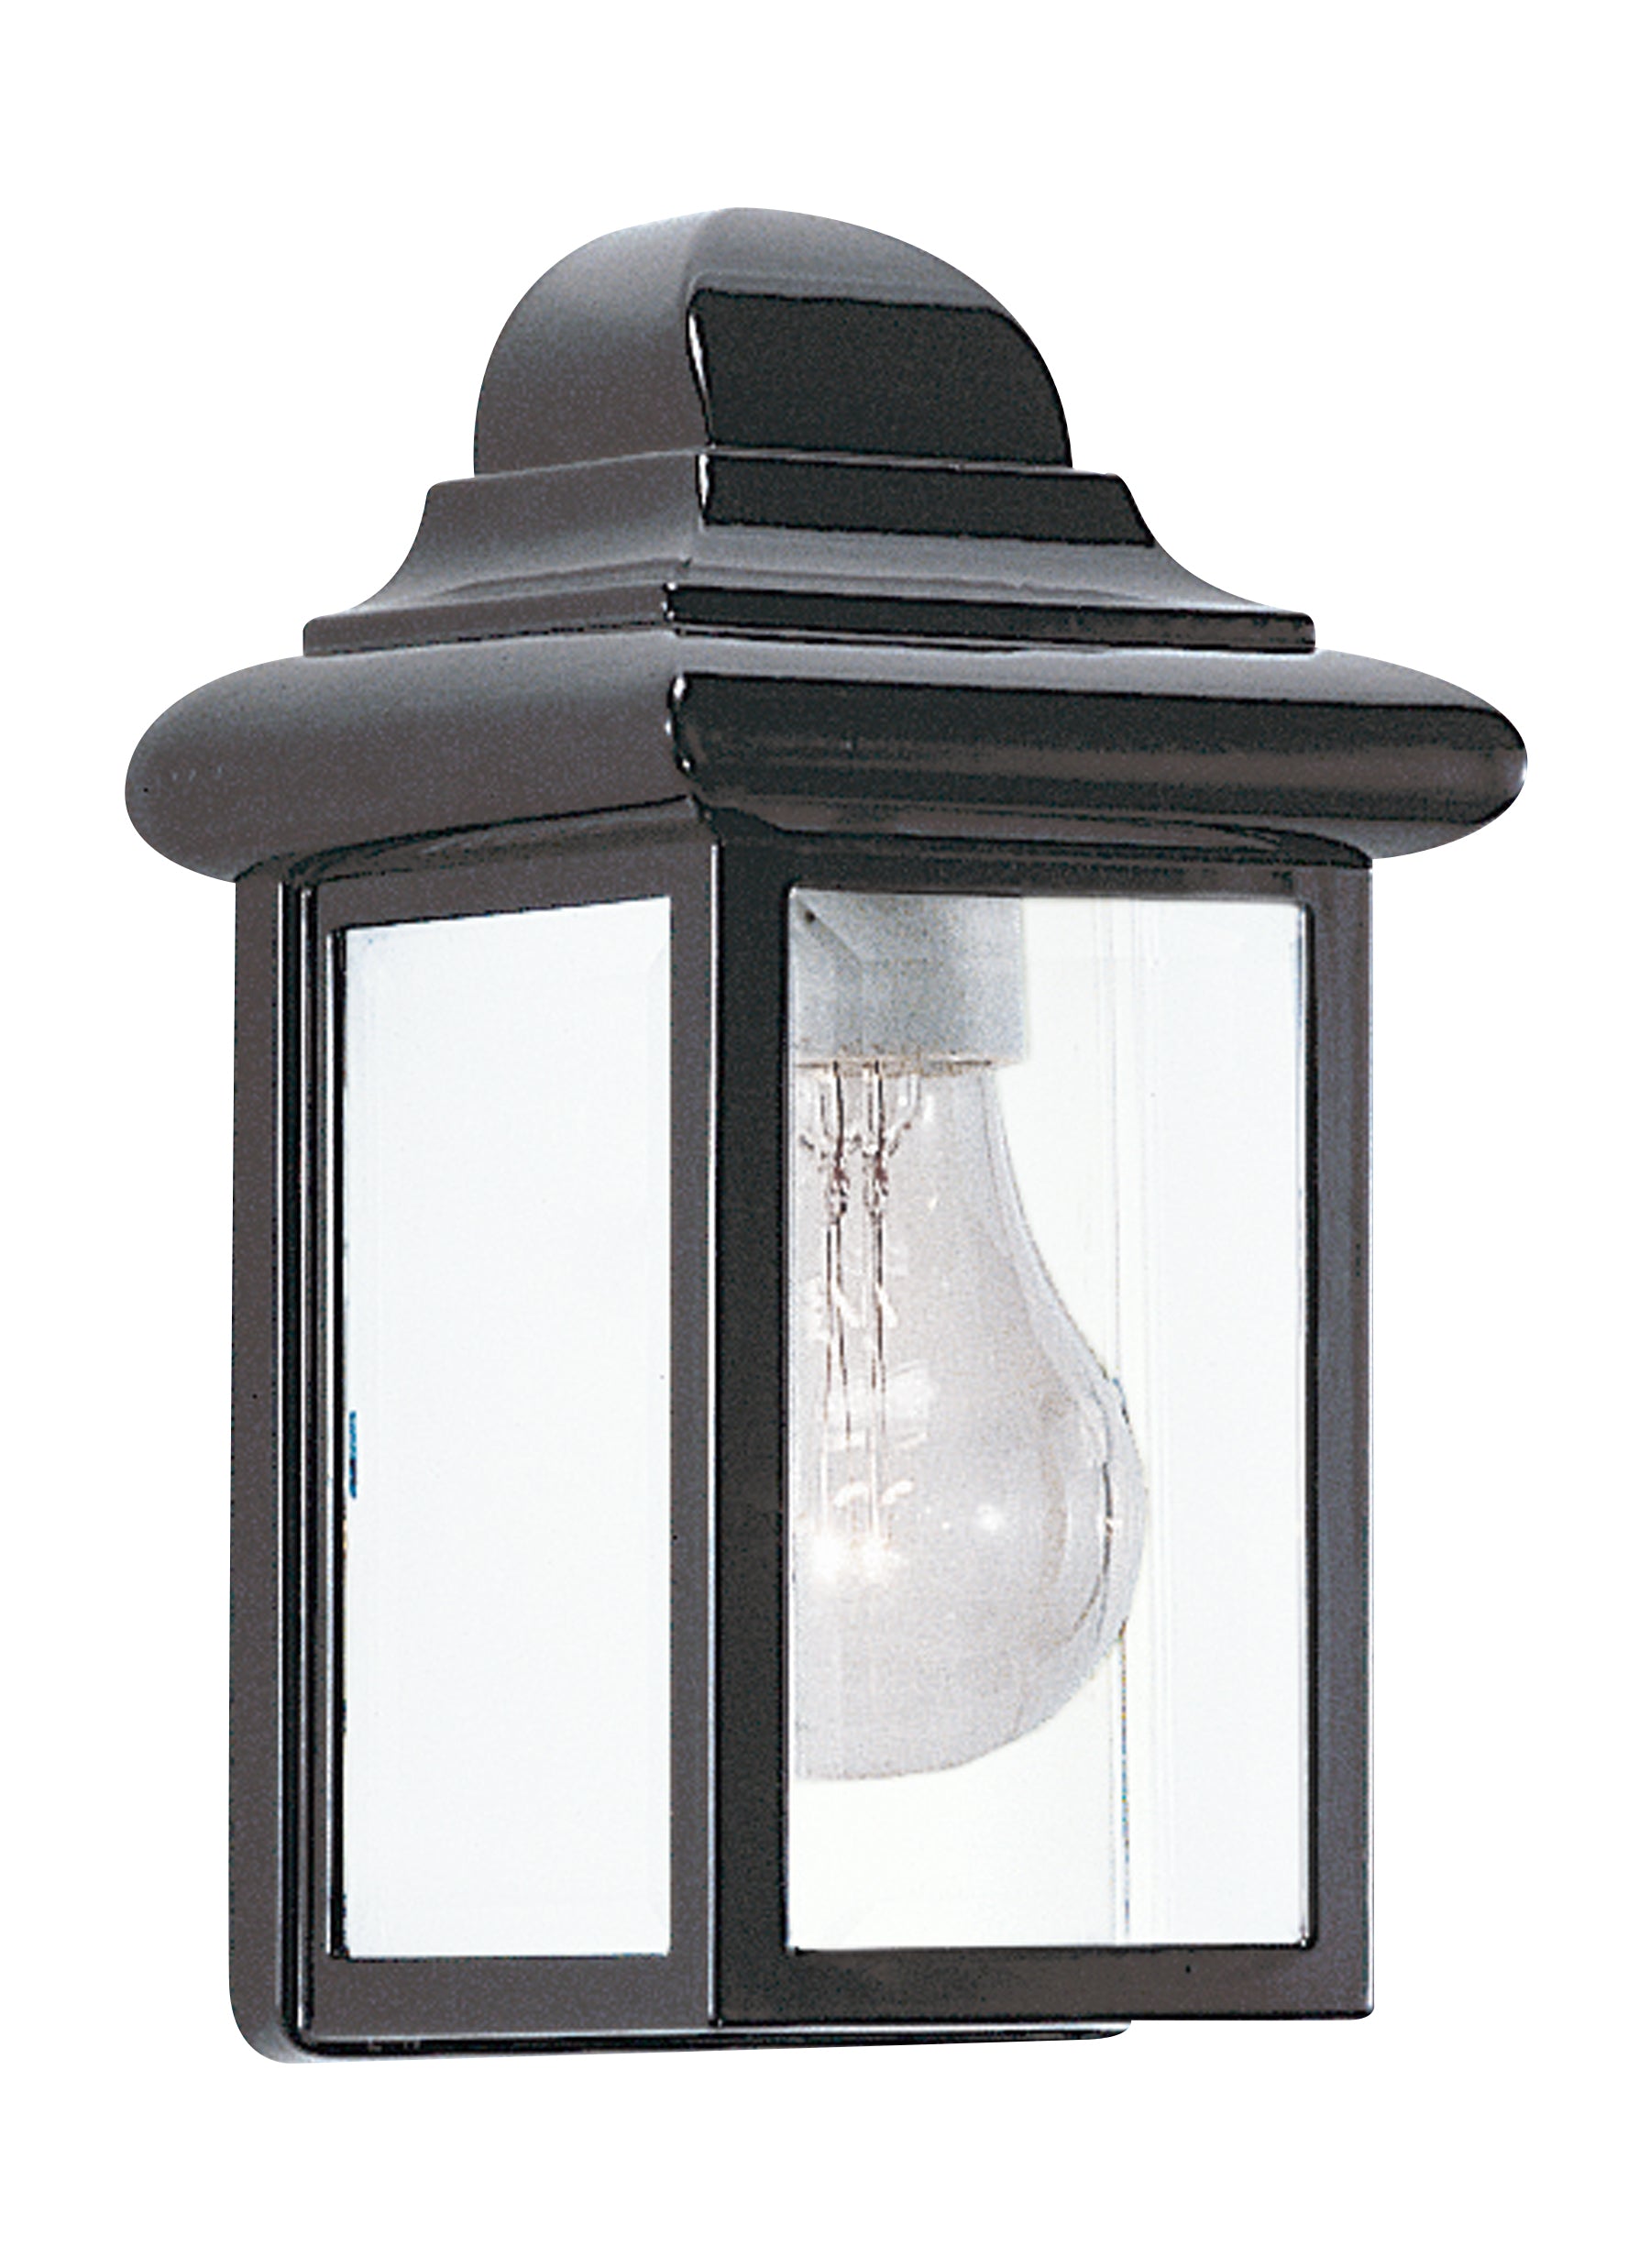 Mullberry Hill traditional 1-light outdoor exterior wall lantern sconce in black finish with clear beveled glass panels